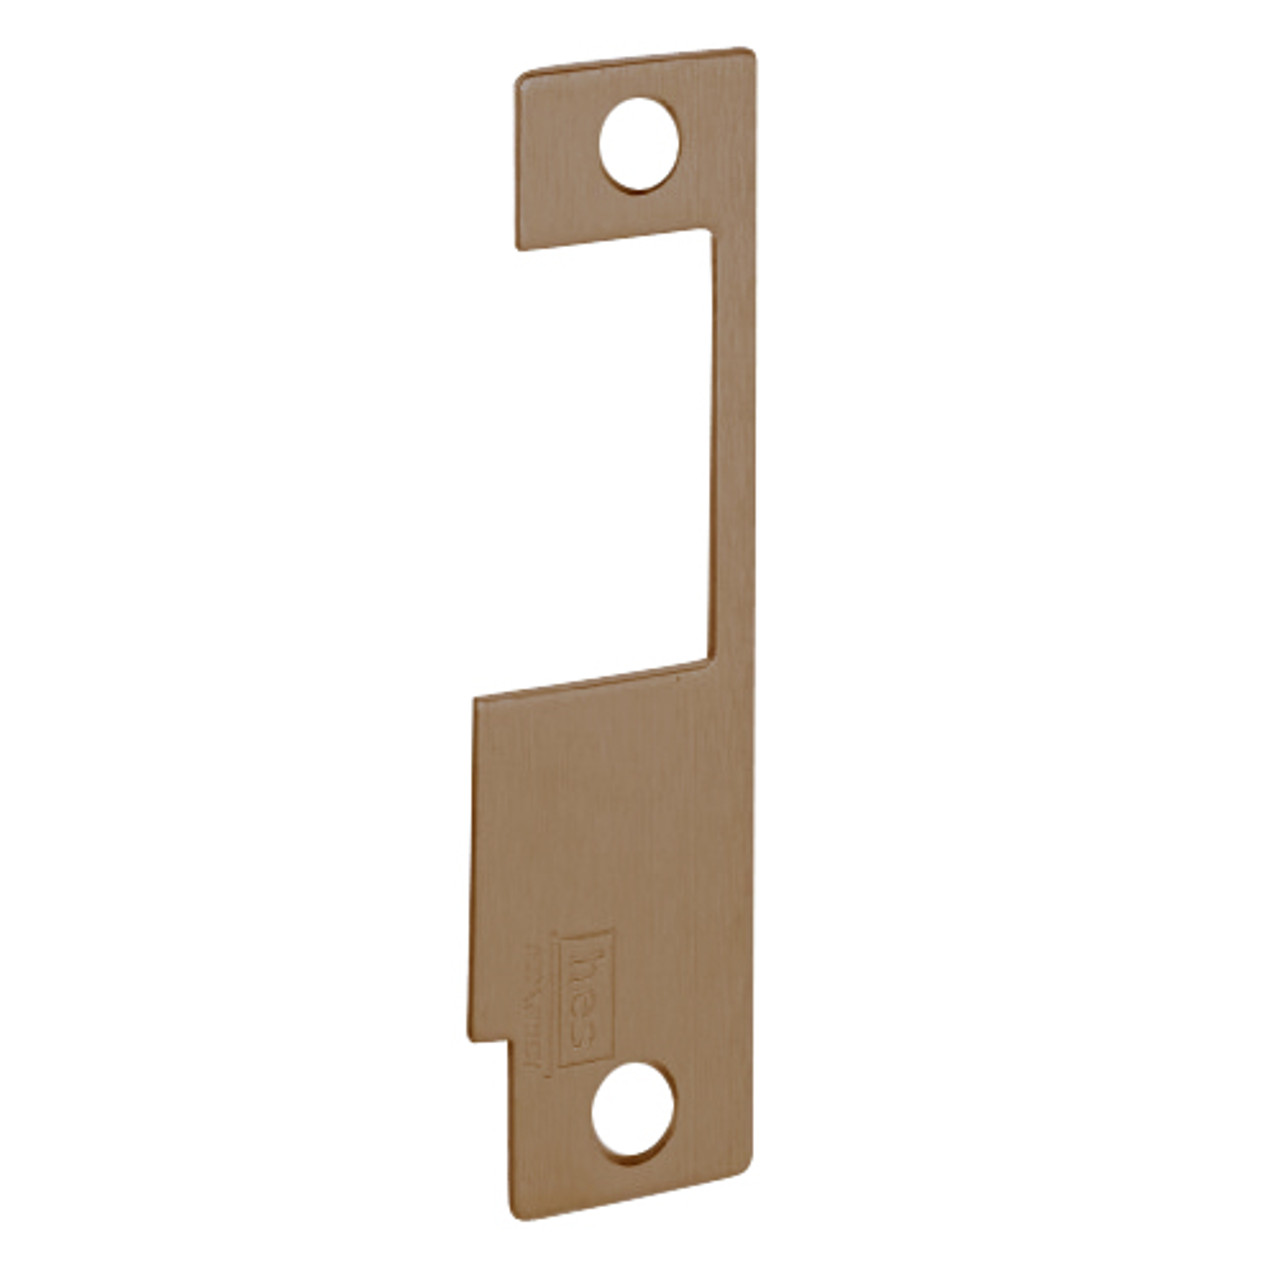 852M-612 Hes 4-7/8" x 1-1/4" Faceplate in Satin Bronze Finish